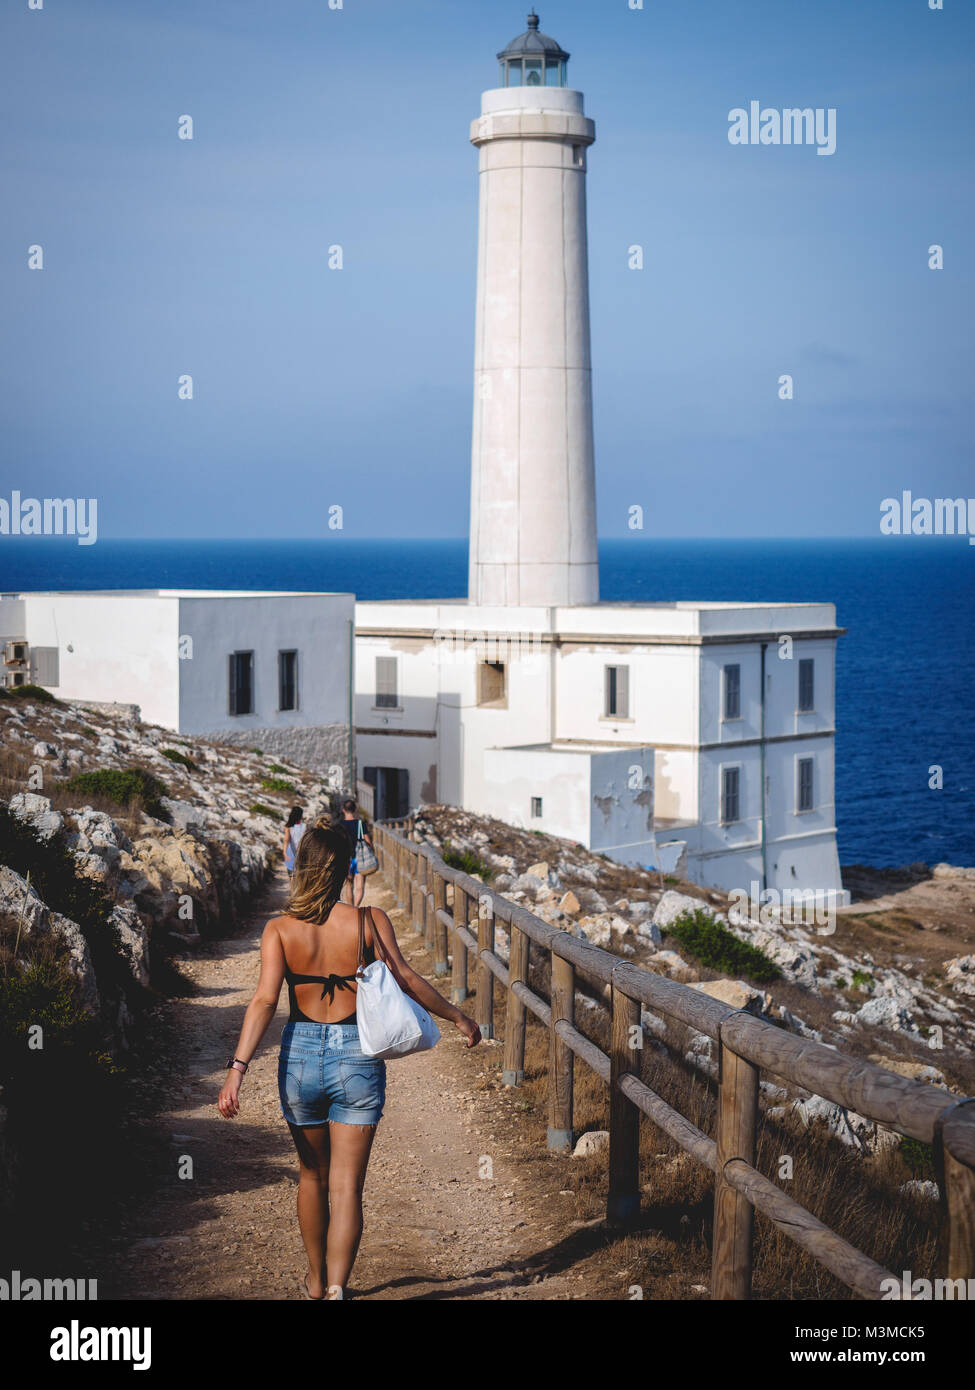 Otranto (Italy), August 2017. The lighthouse at Cape Palascia, near the Apulian town of Otranto, Italy's most easterly point. Portrait format. Stock Photo